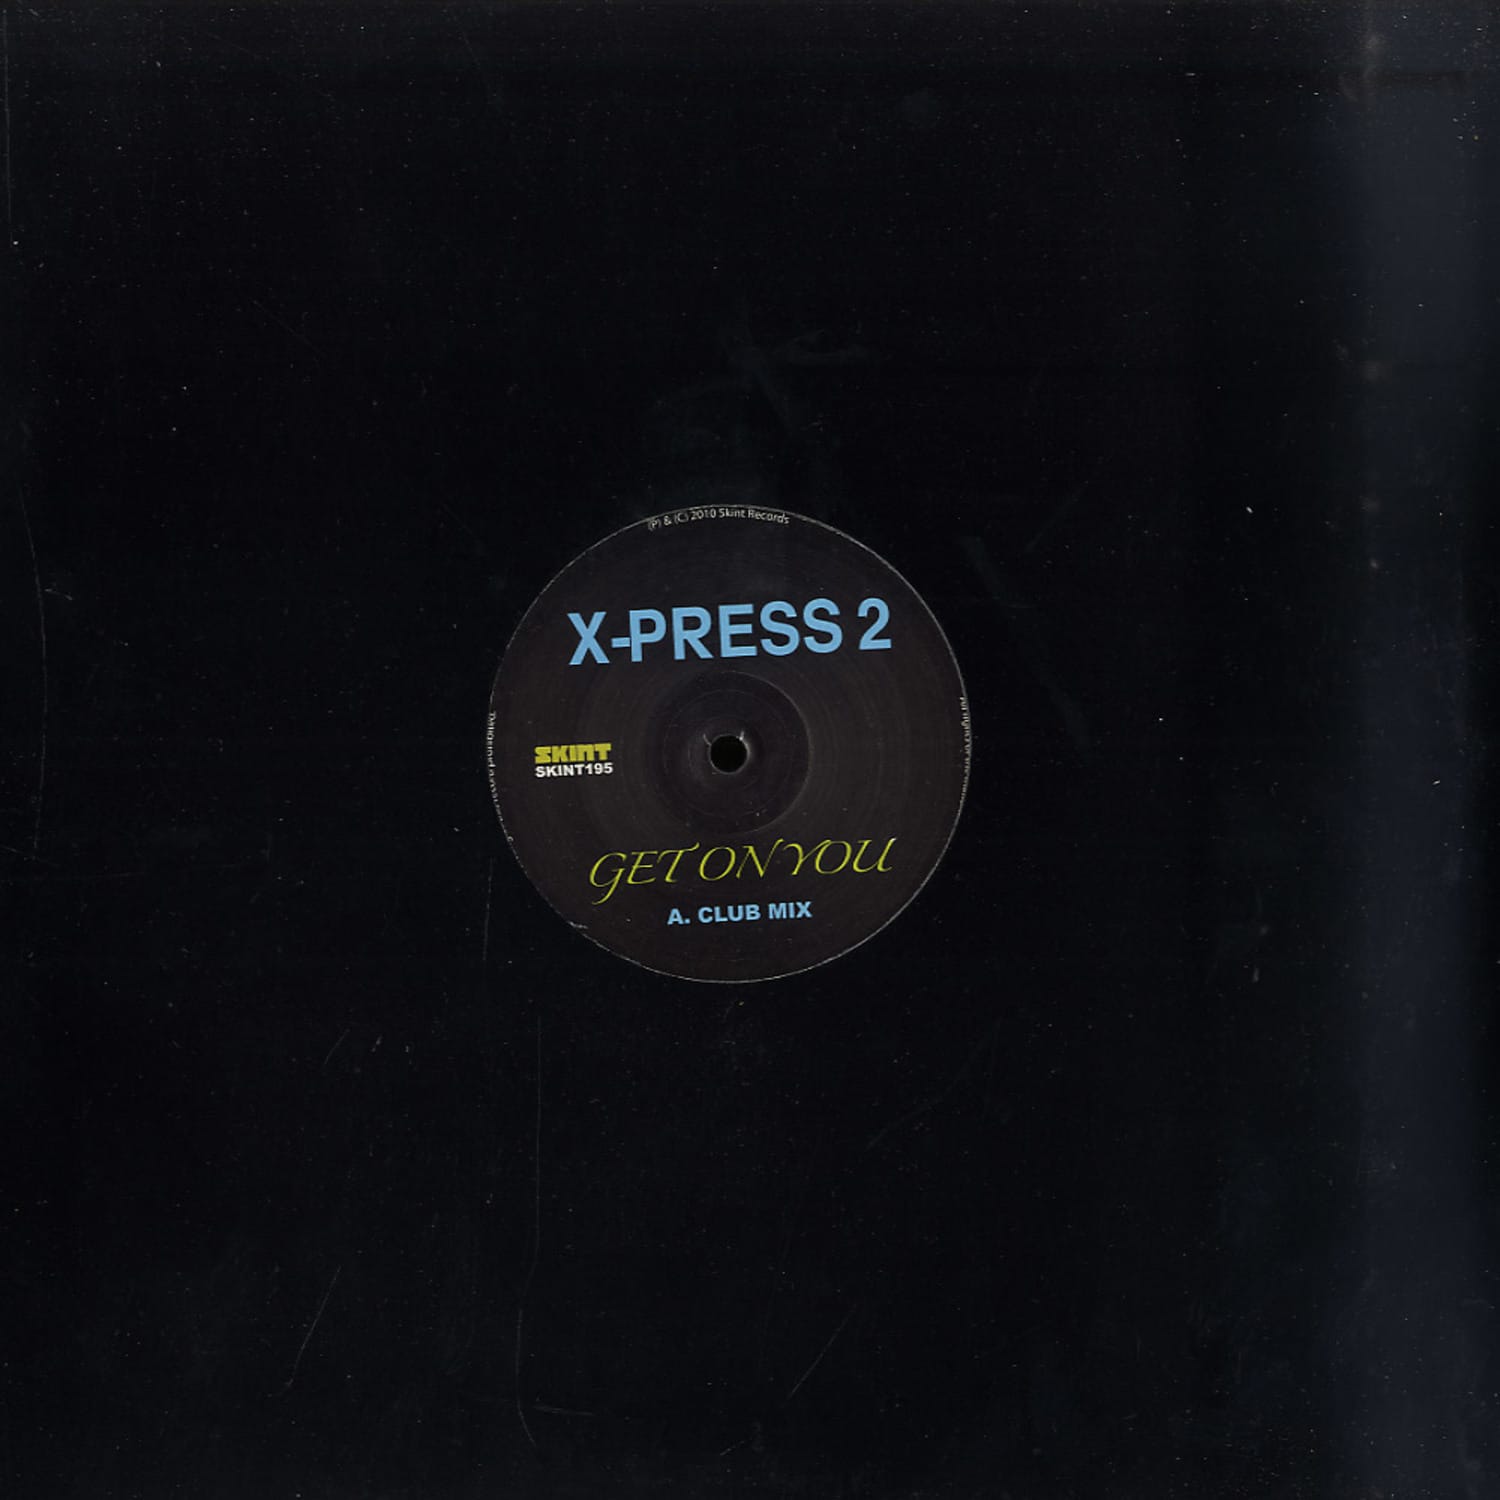 X Press 2 - GET ON YOU